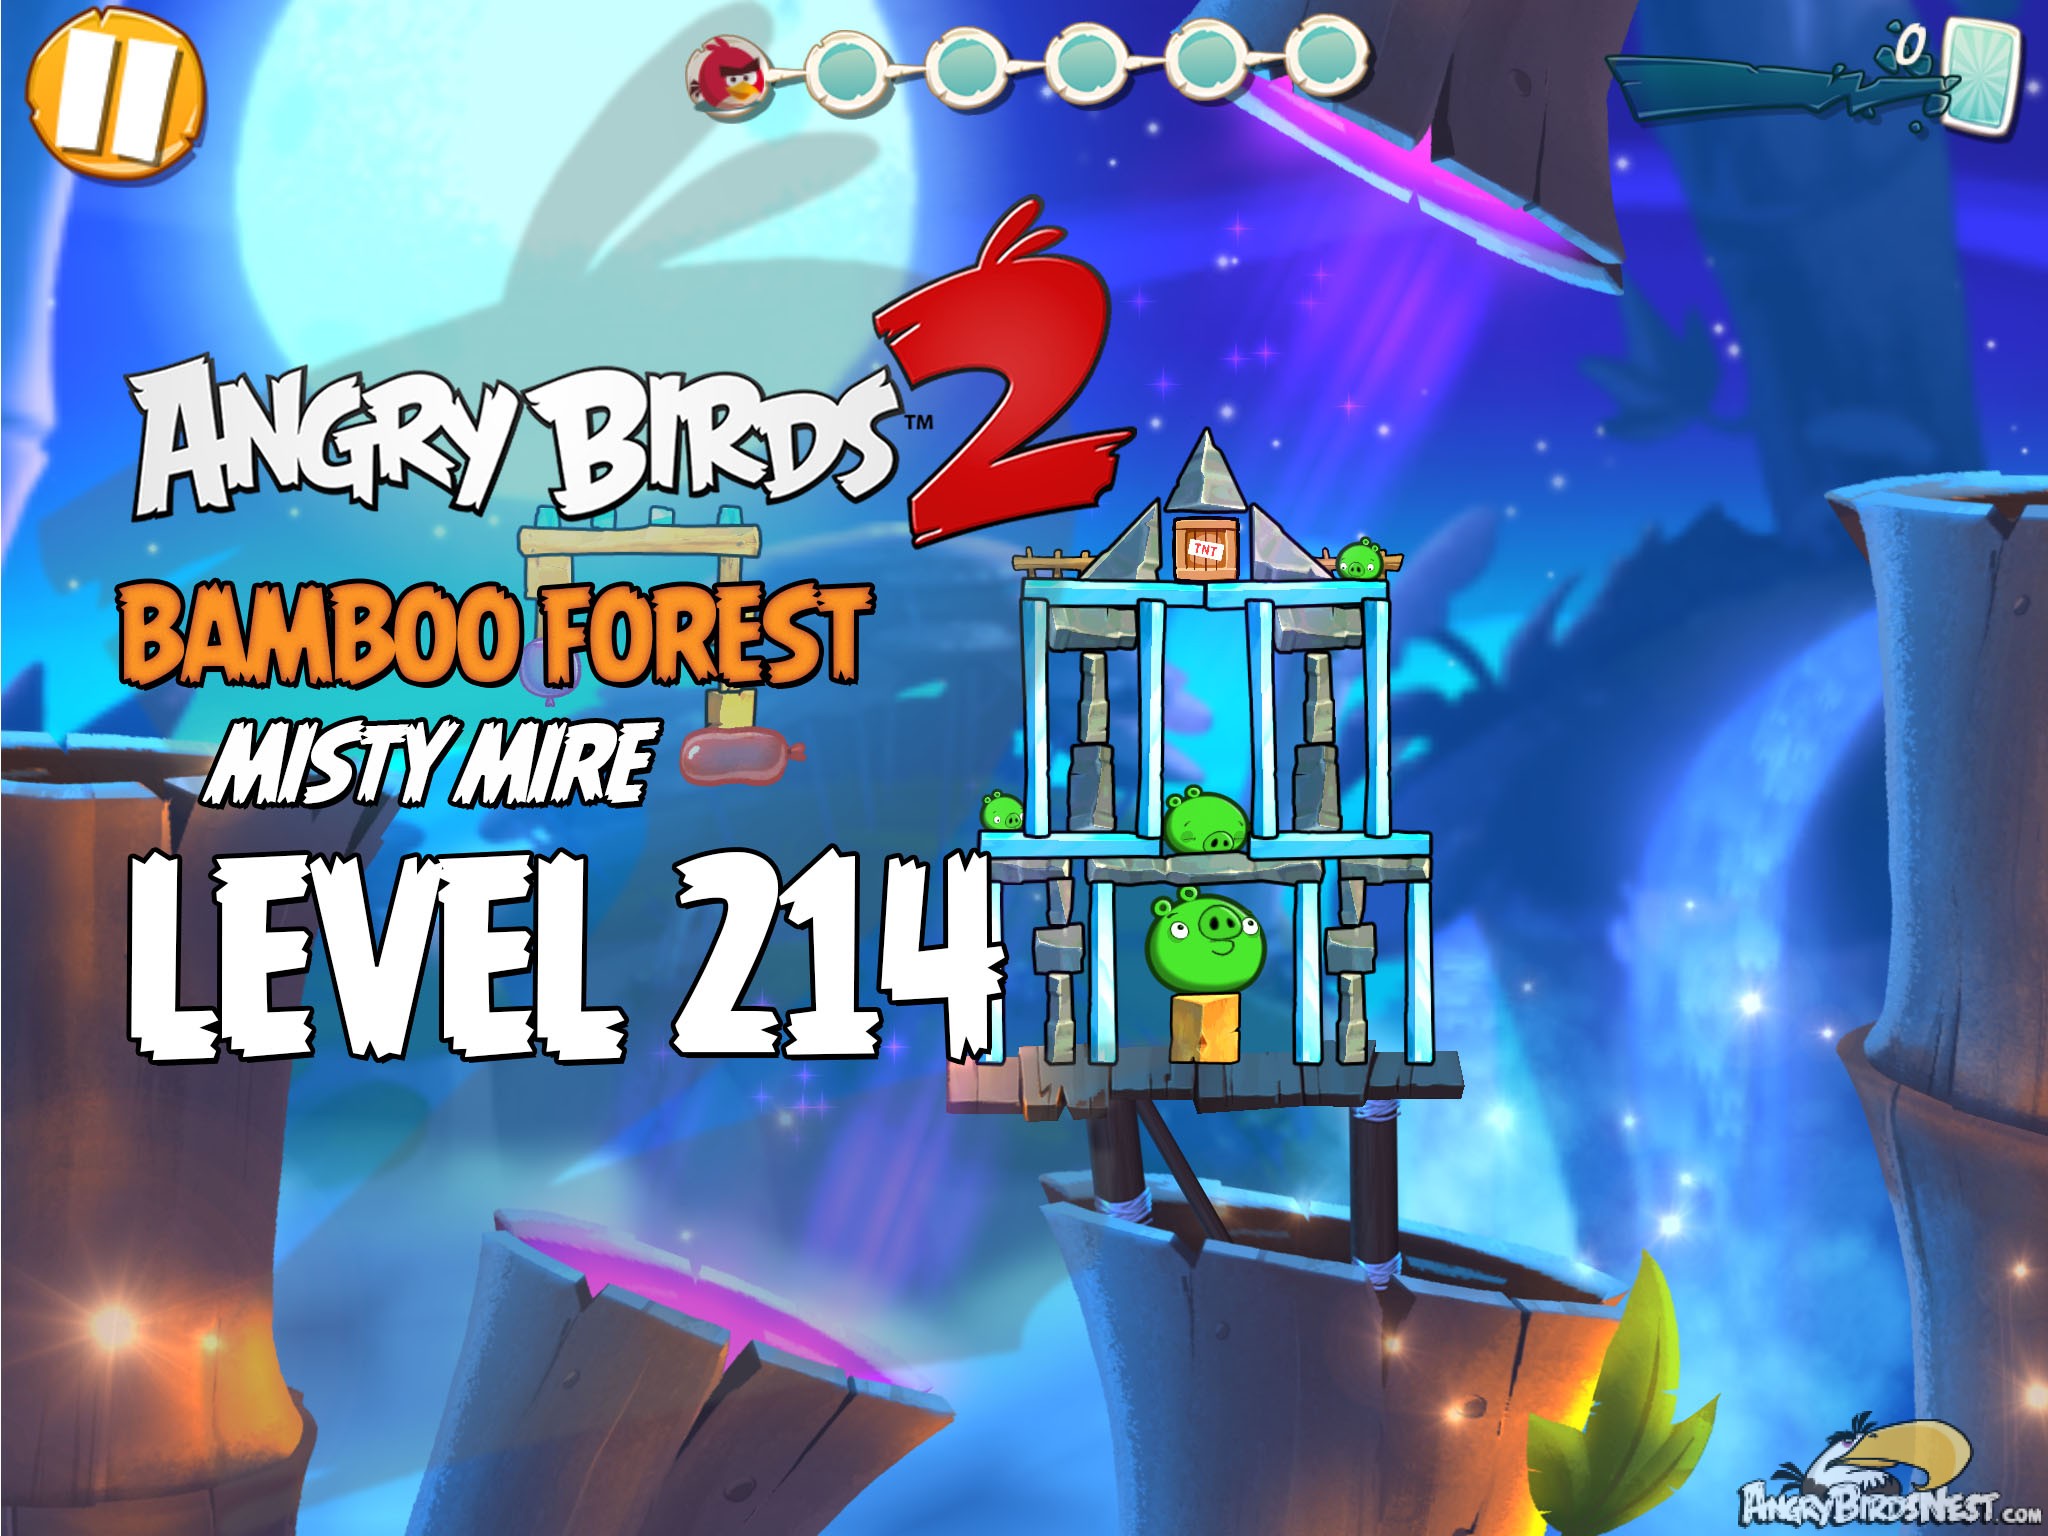 Angry Birds 2 Bamboo Forest Misty Mire Level 214